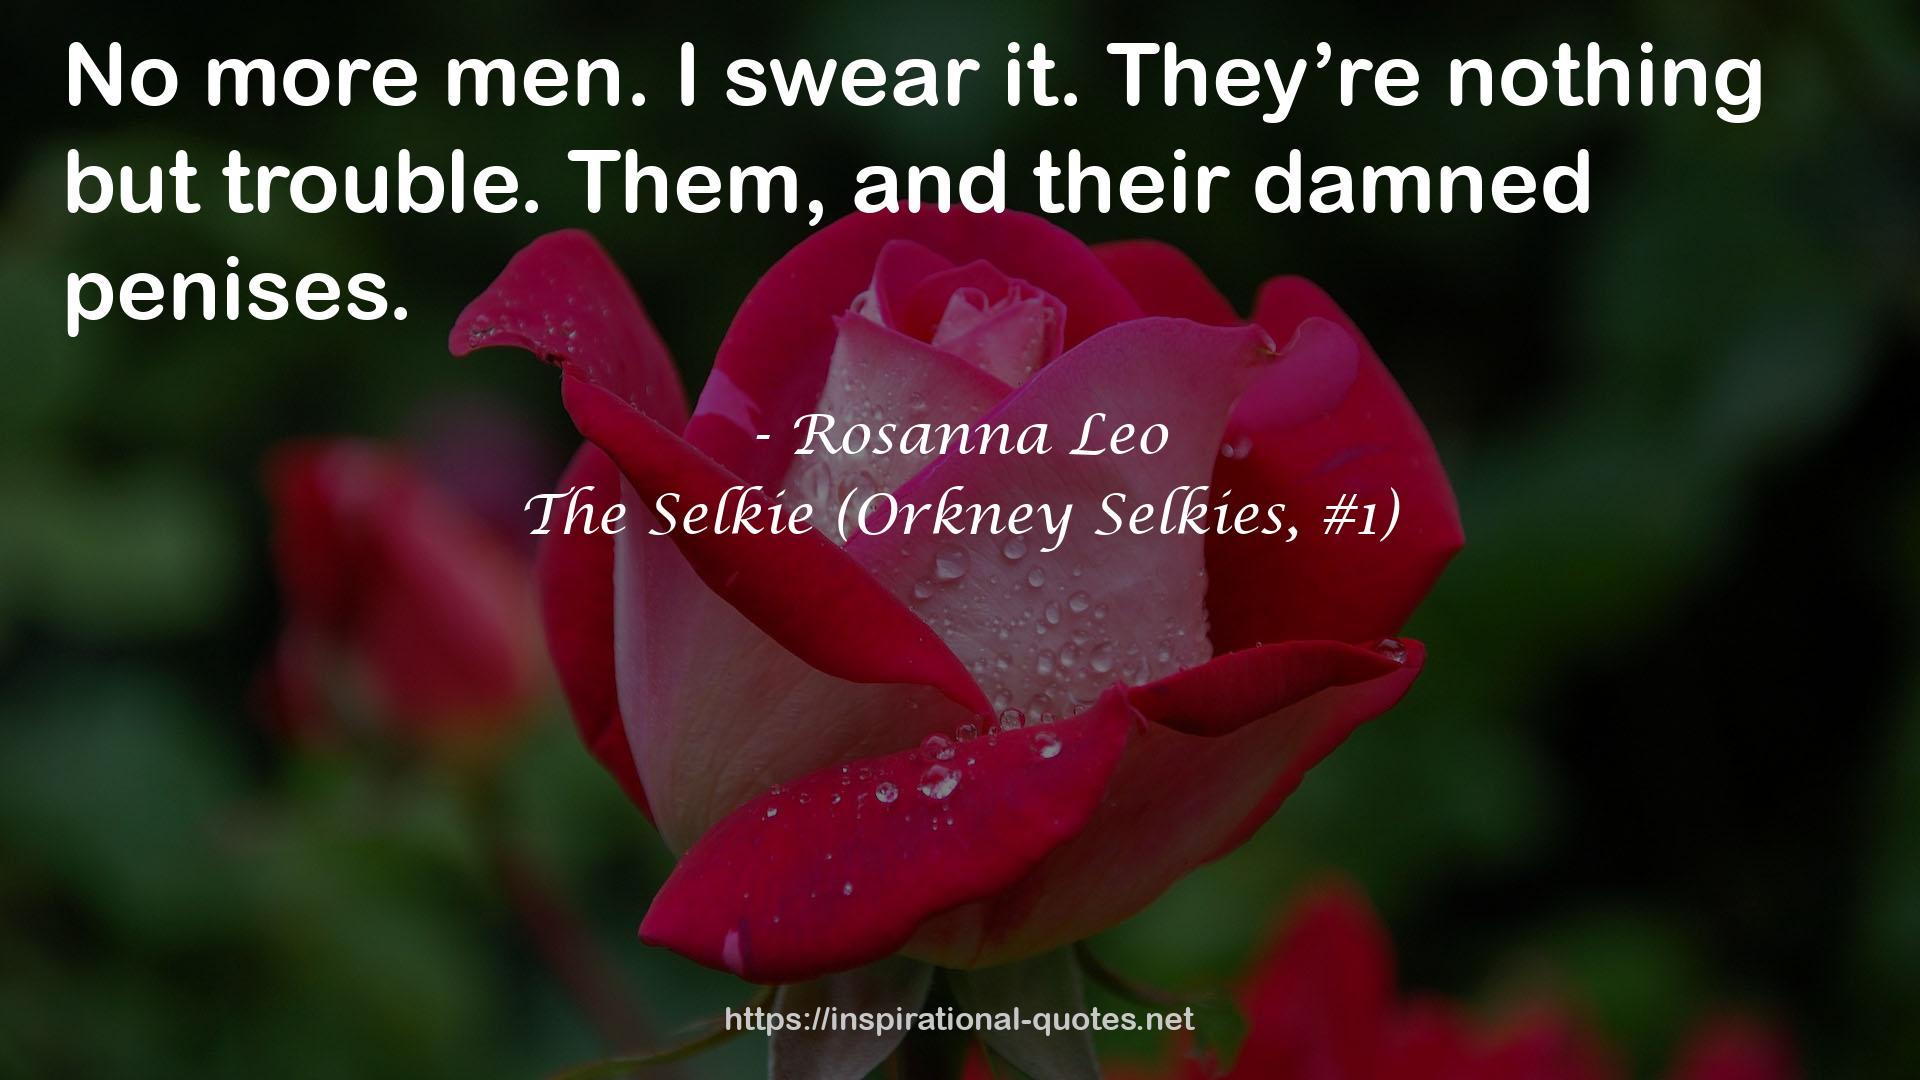 The Selkie (Orkney Selkies, #1) QUOTES